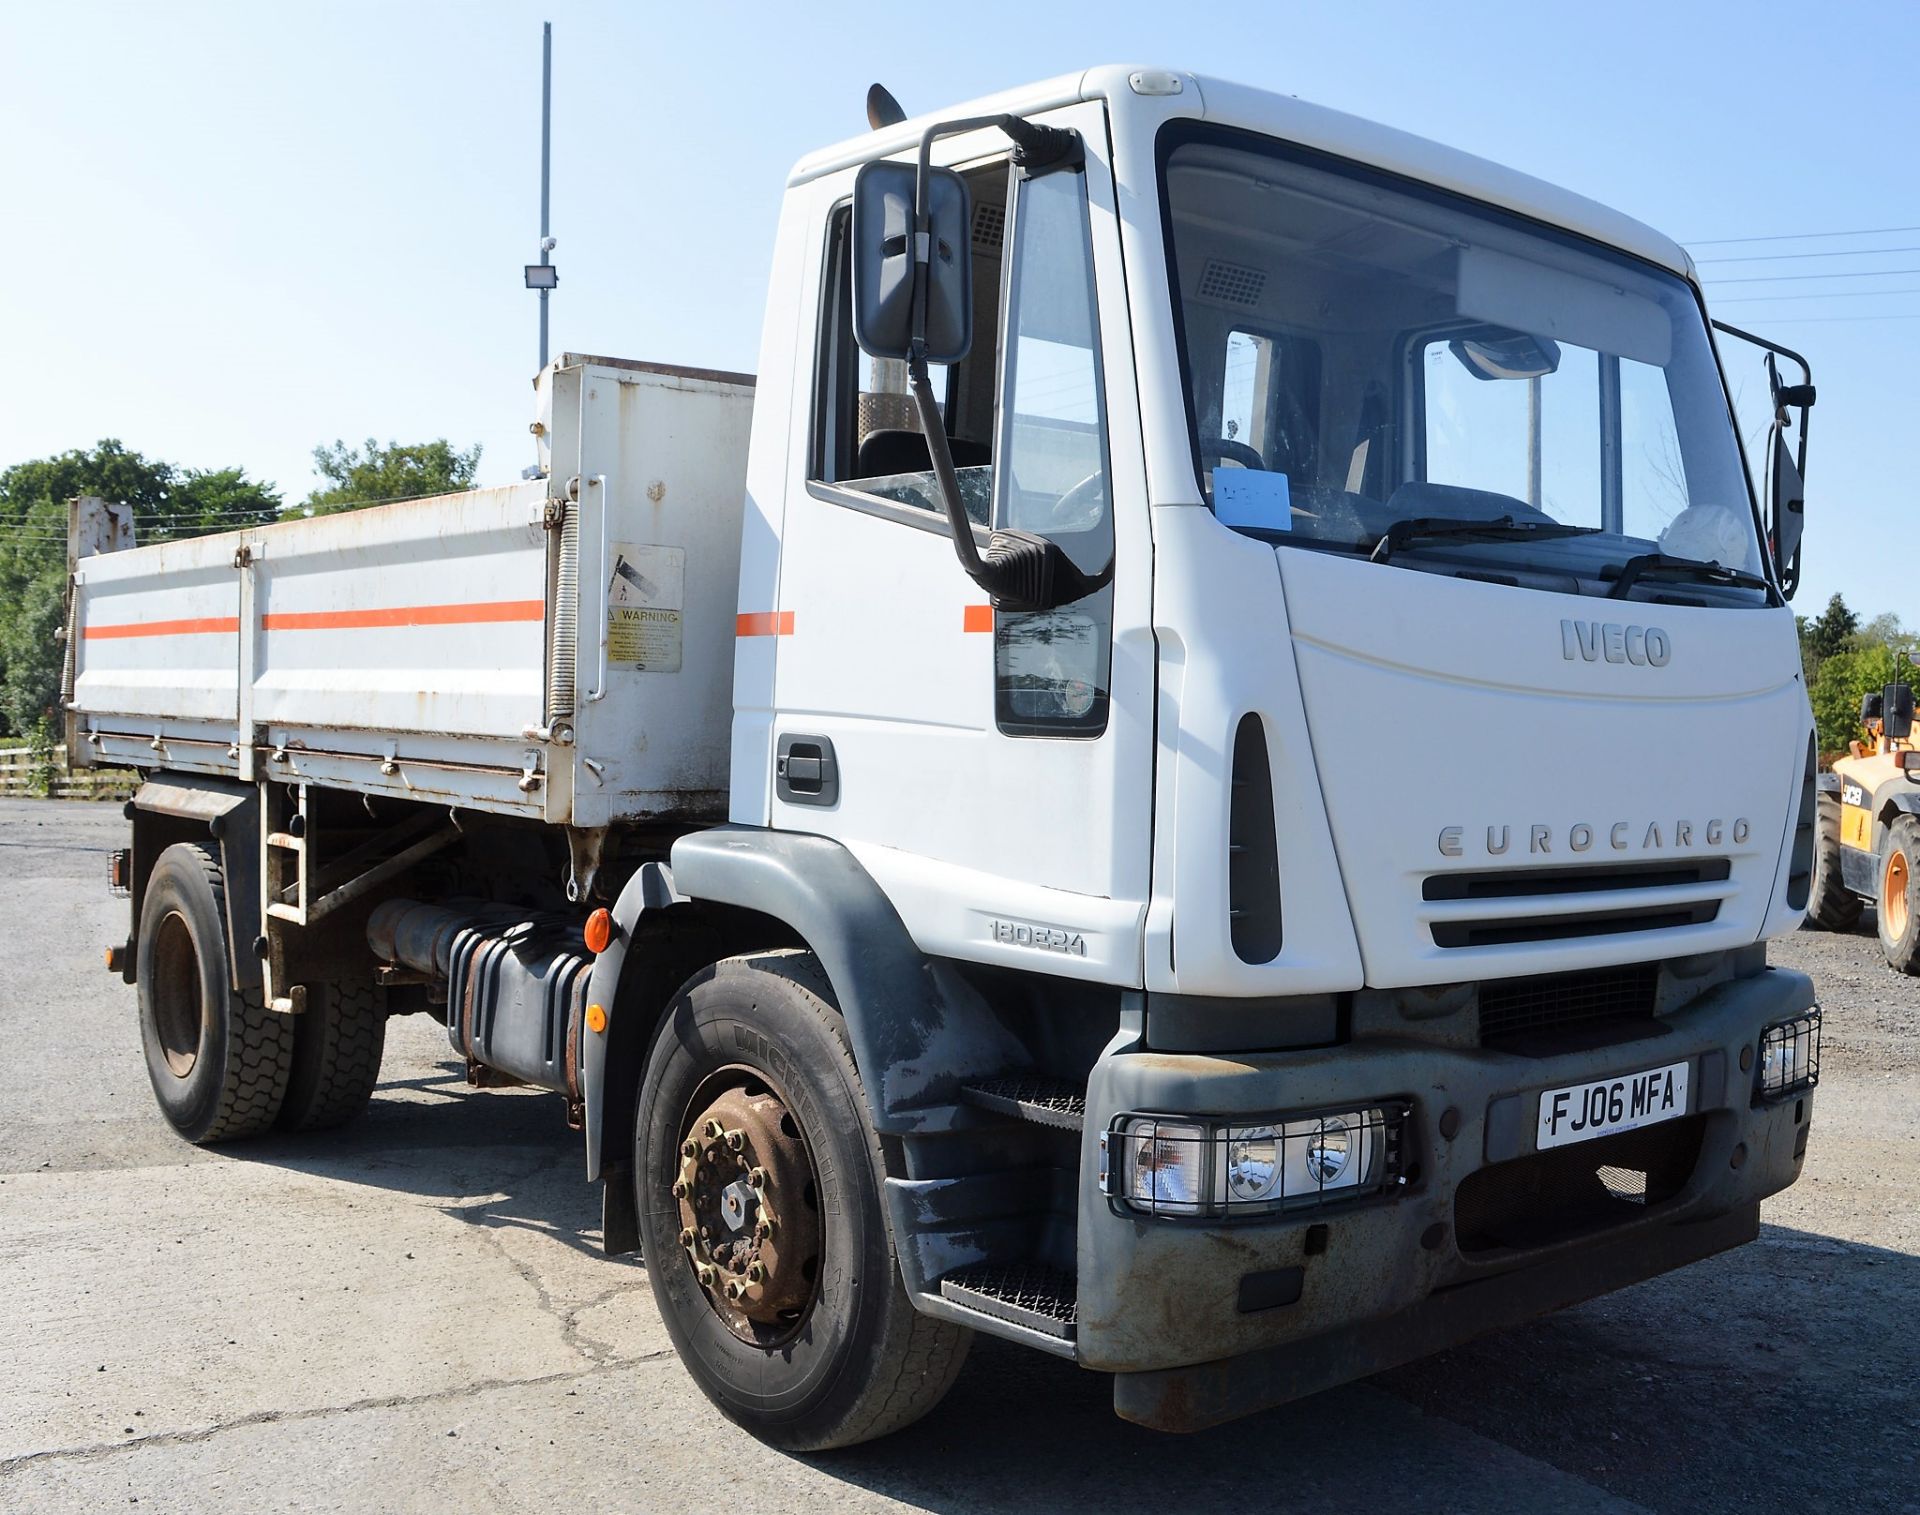 Iveco Eurocargo 180 E24 18 tonne 14 ft tipper lorry Registration Number: FJ06 MFA Date of - Image 2 of 12